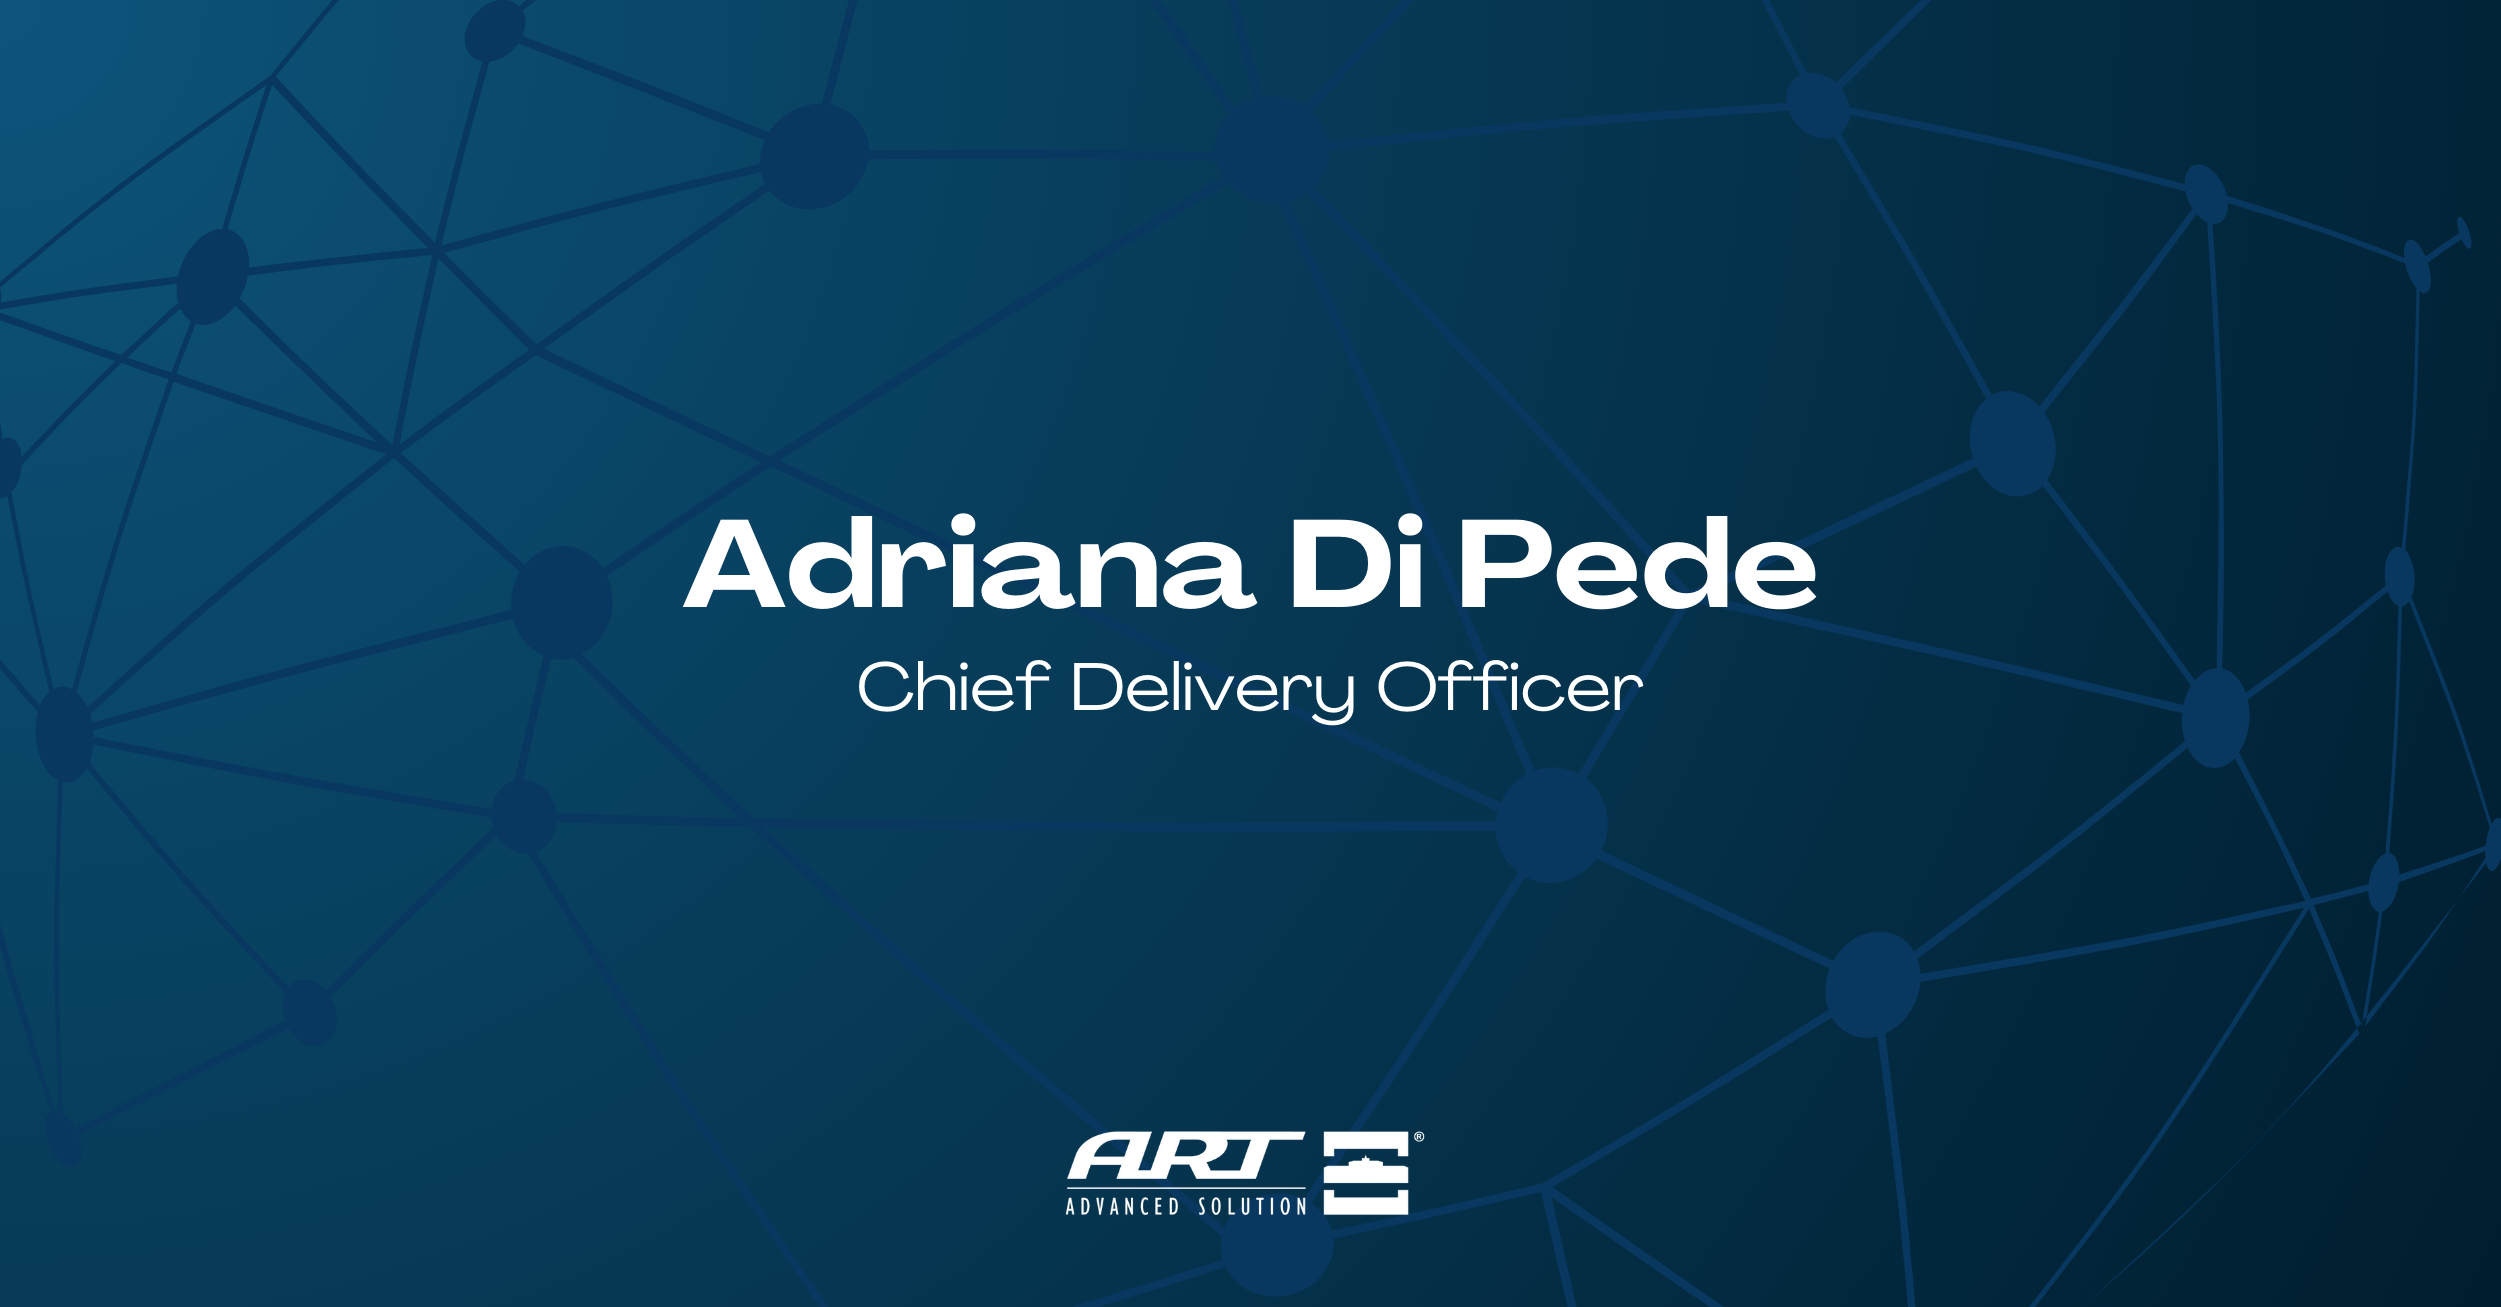 ART Spa announces that Adriana Di Pede have joined the group as the new Chief Delivery Officer